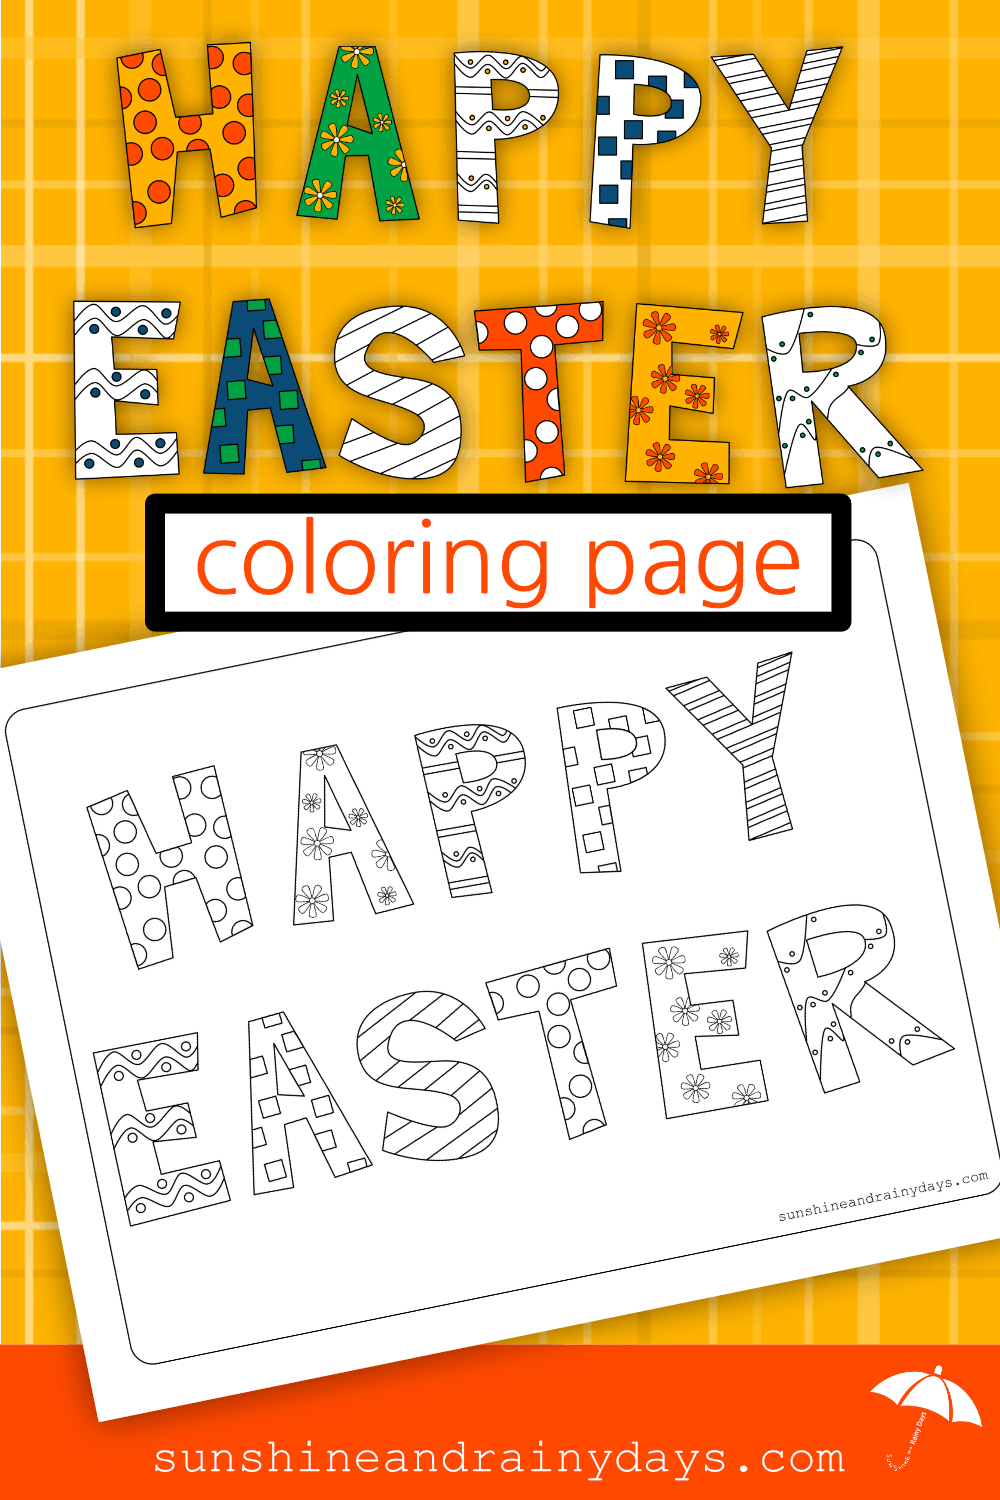 The Happy Easter Coloring Page is here to help you Celebrate Easter!